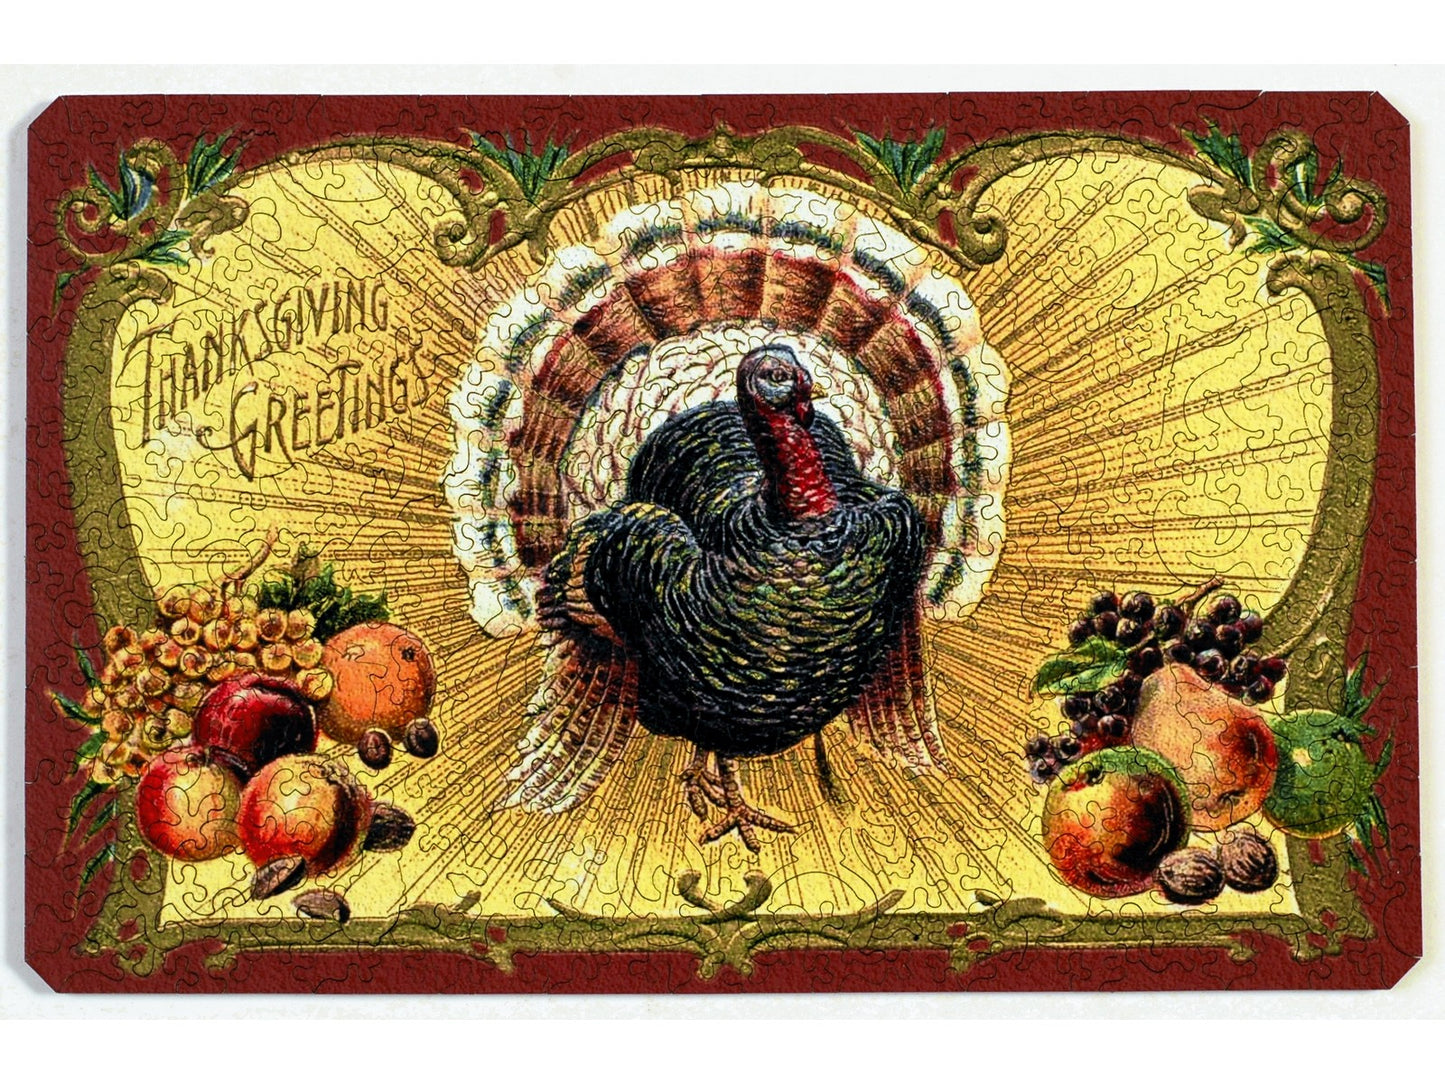 The front of the puzzle, Thanksgiving Postcard, which shows a turkey surrounded by fruit and a decorative border.